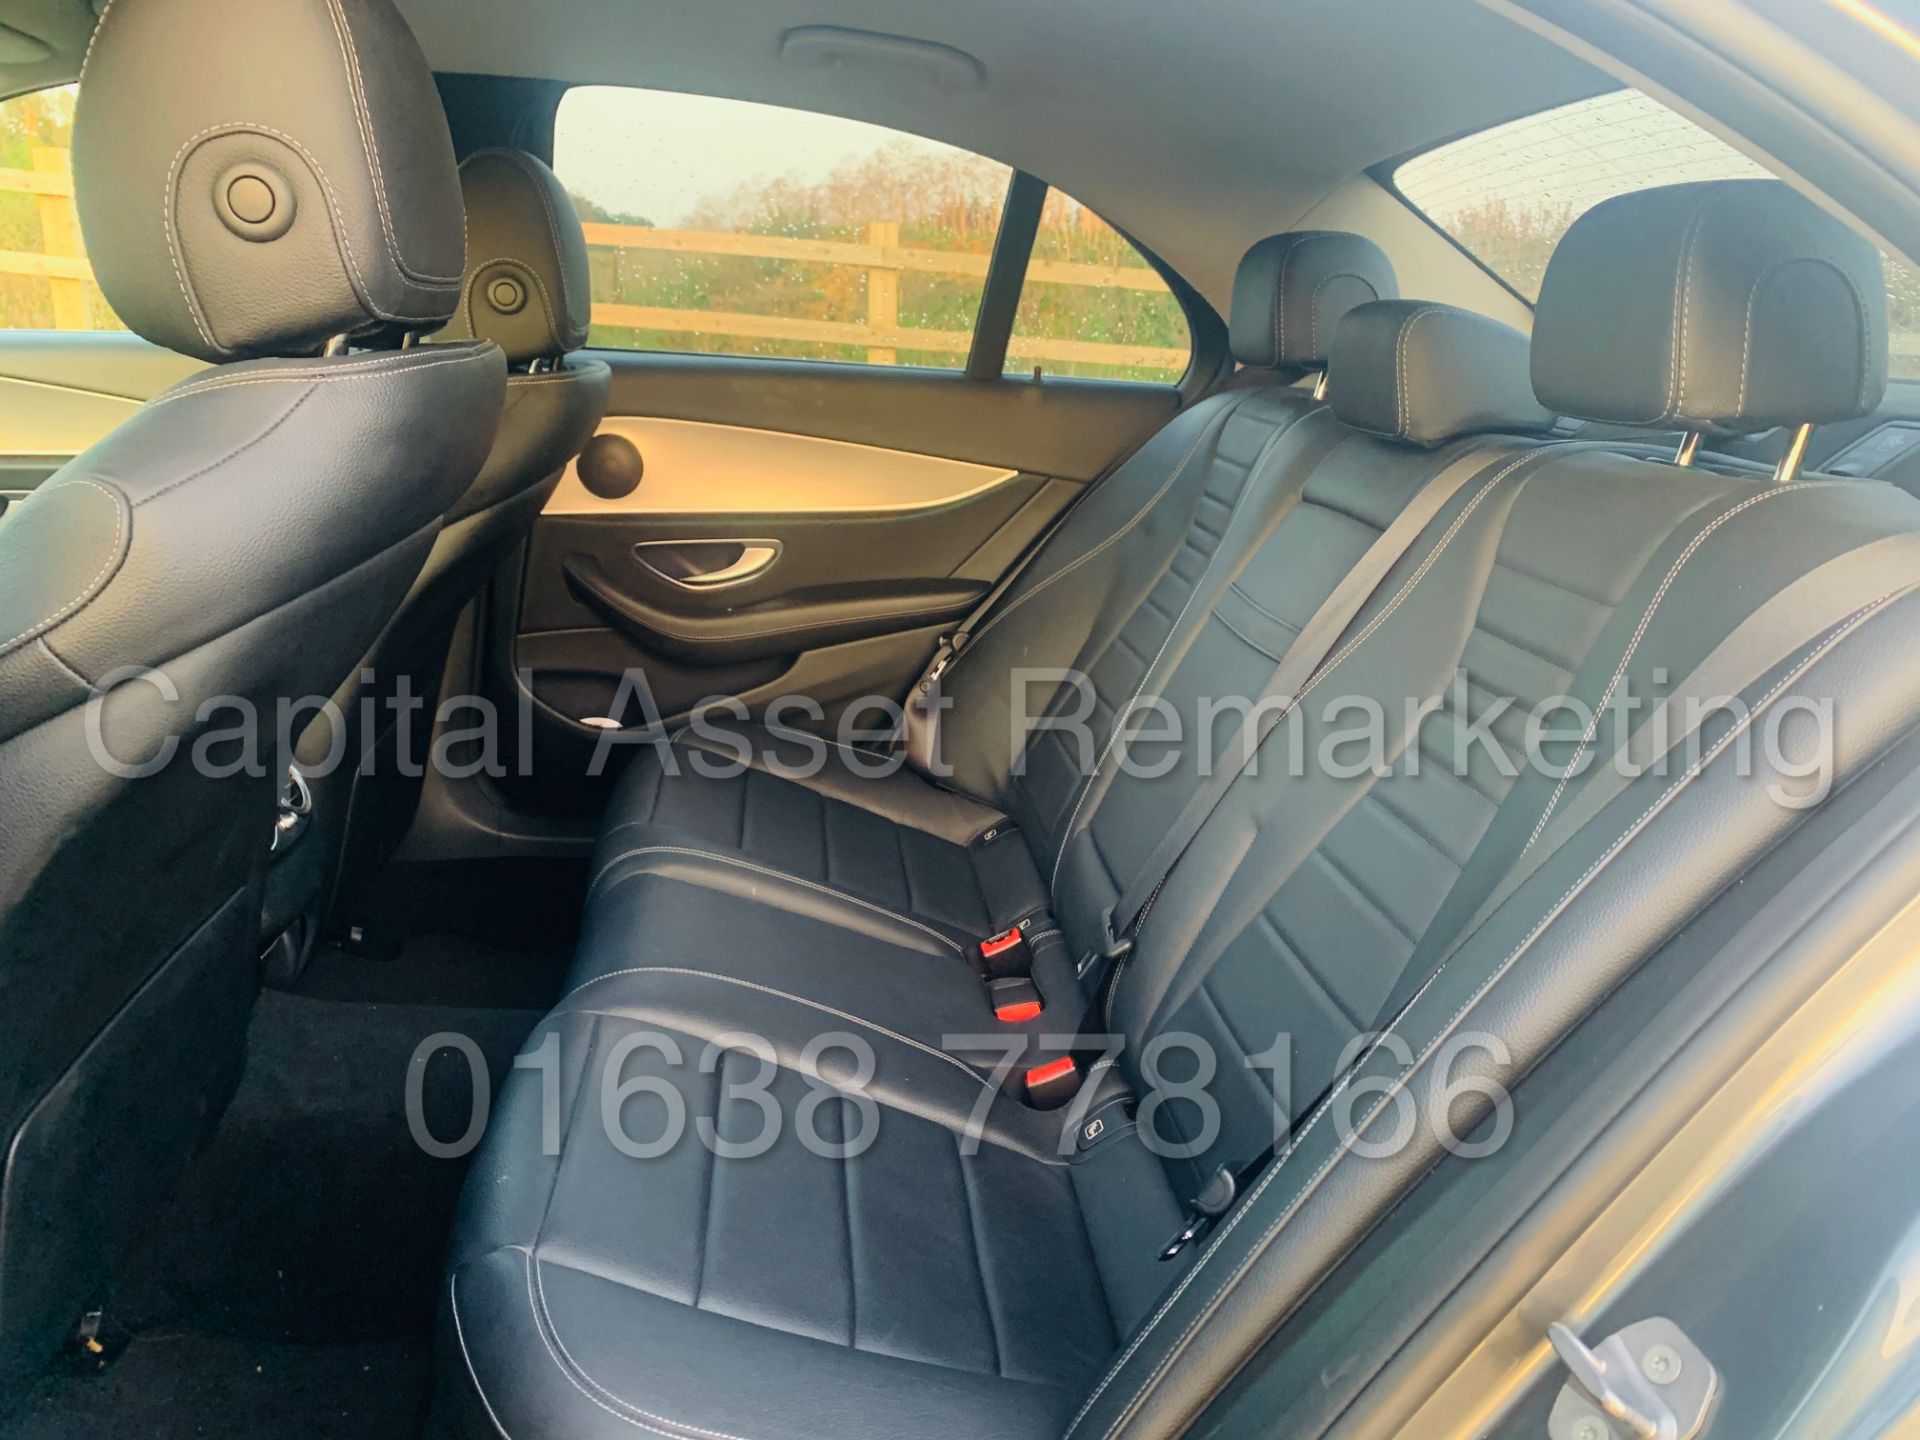 (On Sale) MERCEDES-BENZ E220D *SALOON* (2018 - NEW MODEL) '9-G TRONIC AUTO - LEATHER - SAT NAV' - Image 27 of 53